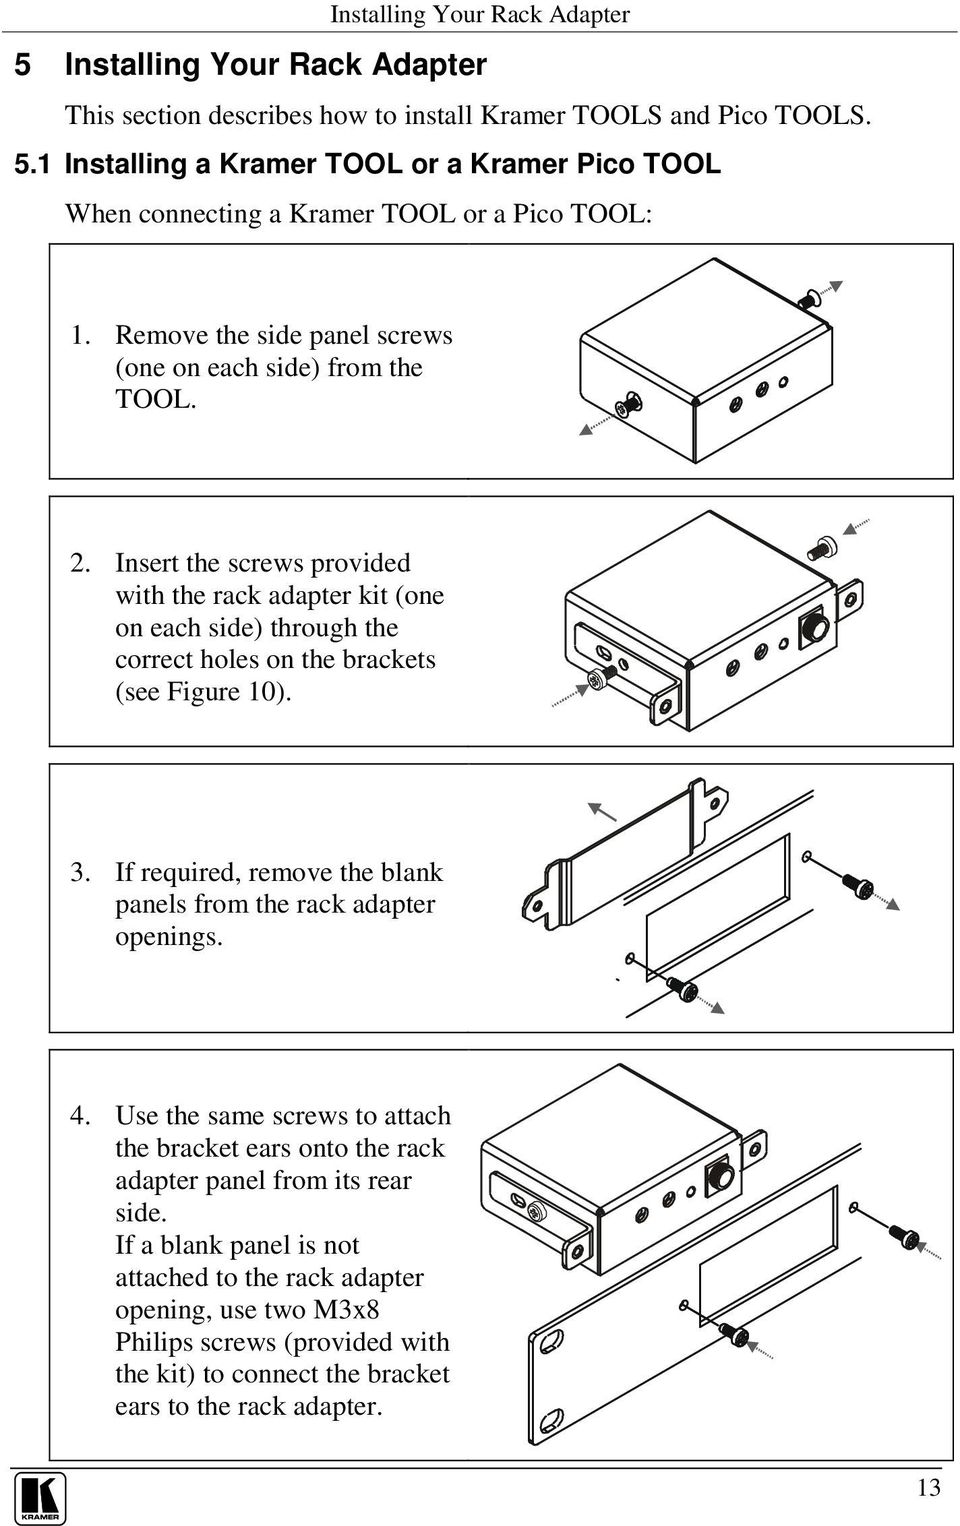 Insert the screws provided with the rack adapter kit (one on each side) through the correct holes on the brackets (see Figure 10). 3.